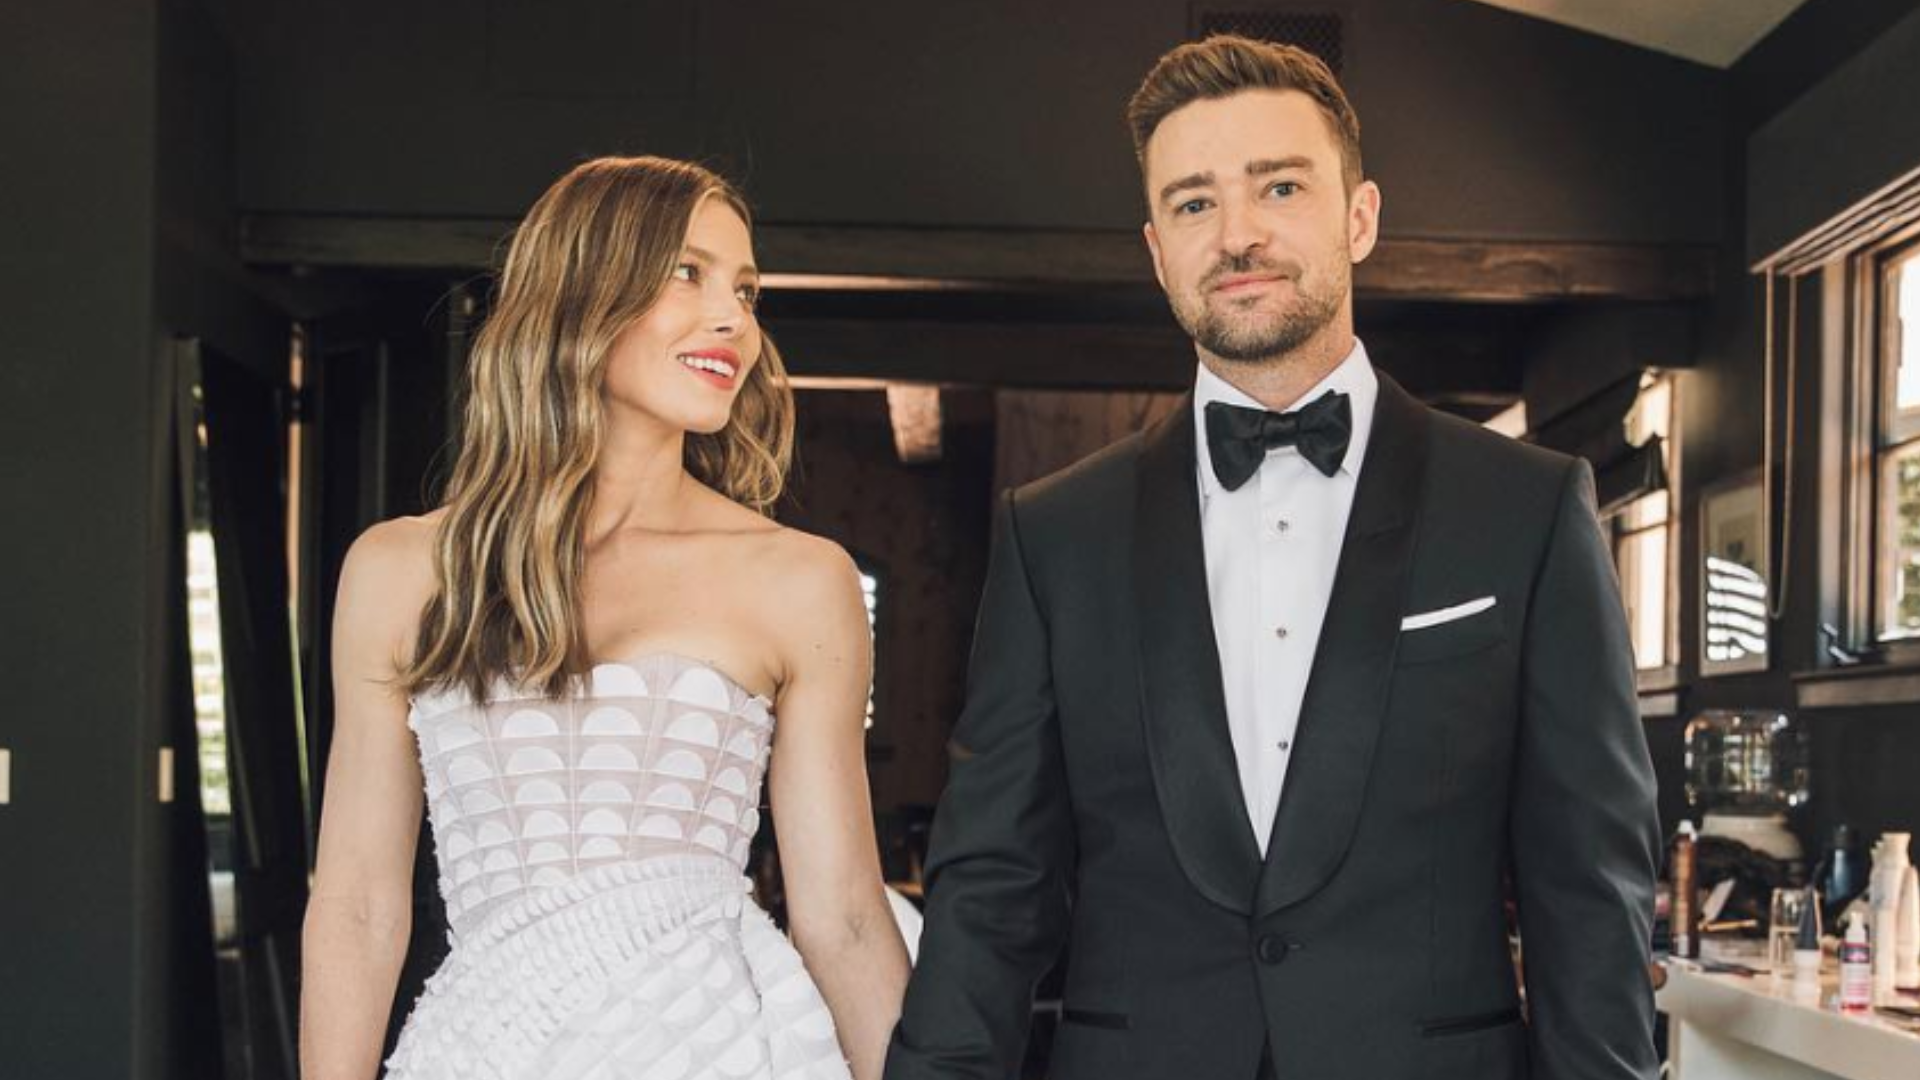 A Look Back at Justin Timberlake and Jessica Biel's Cutest Moments